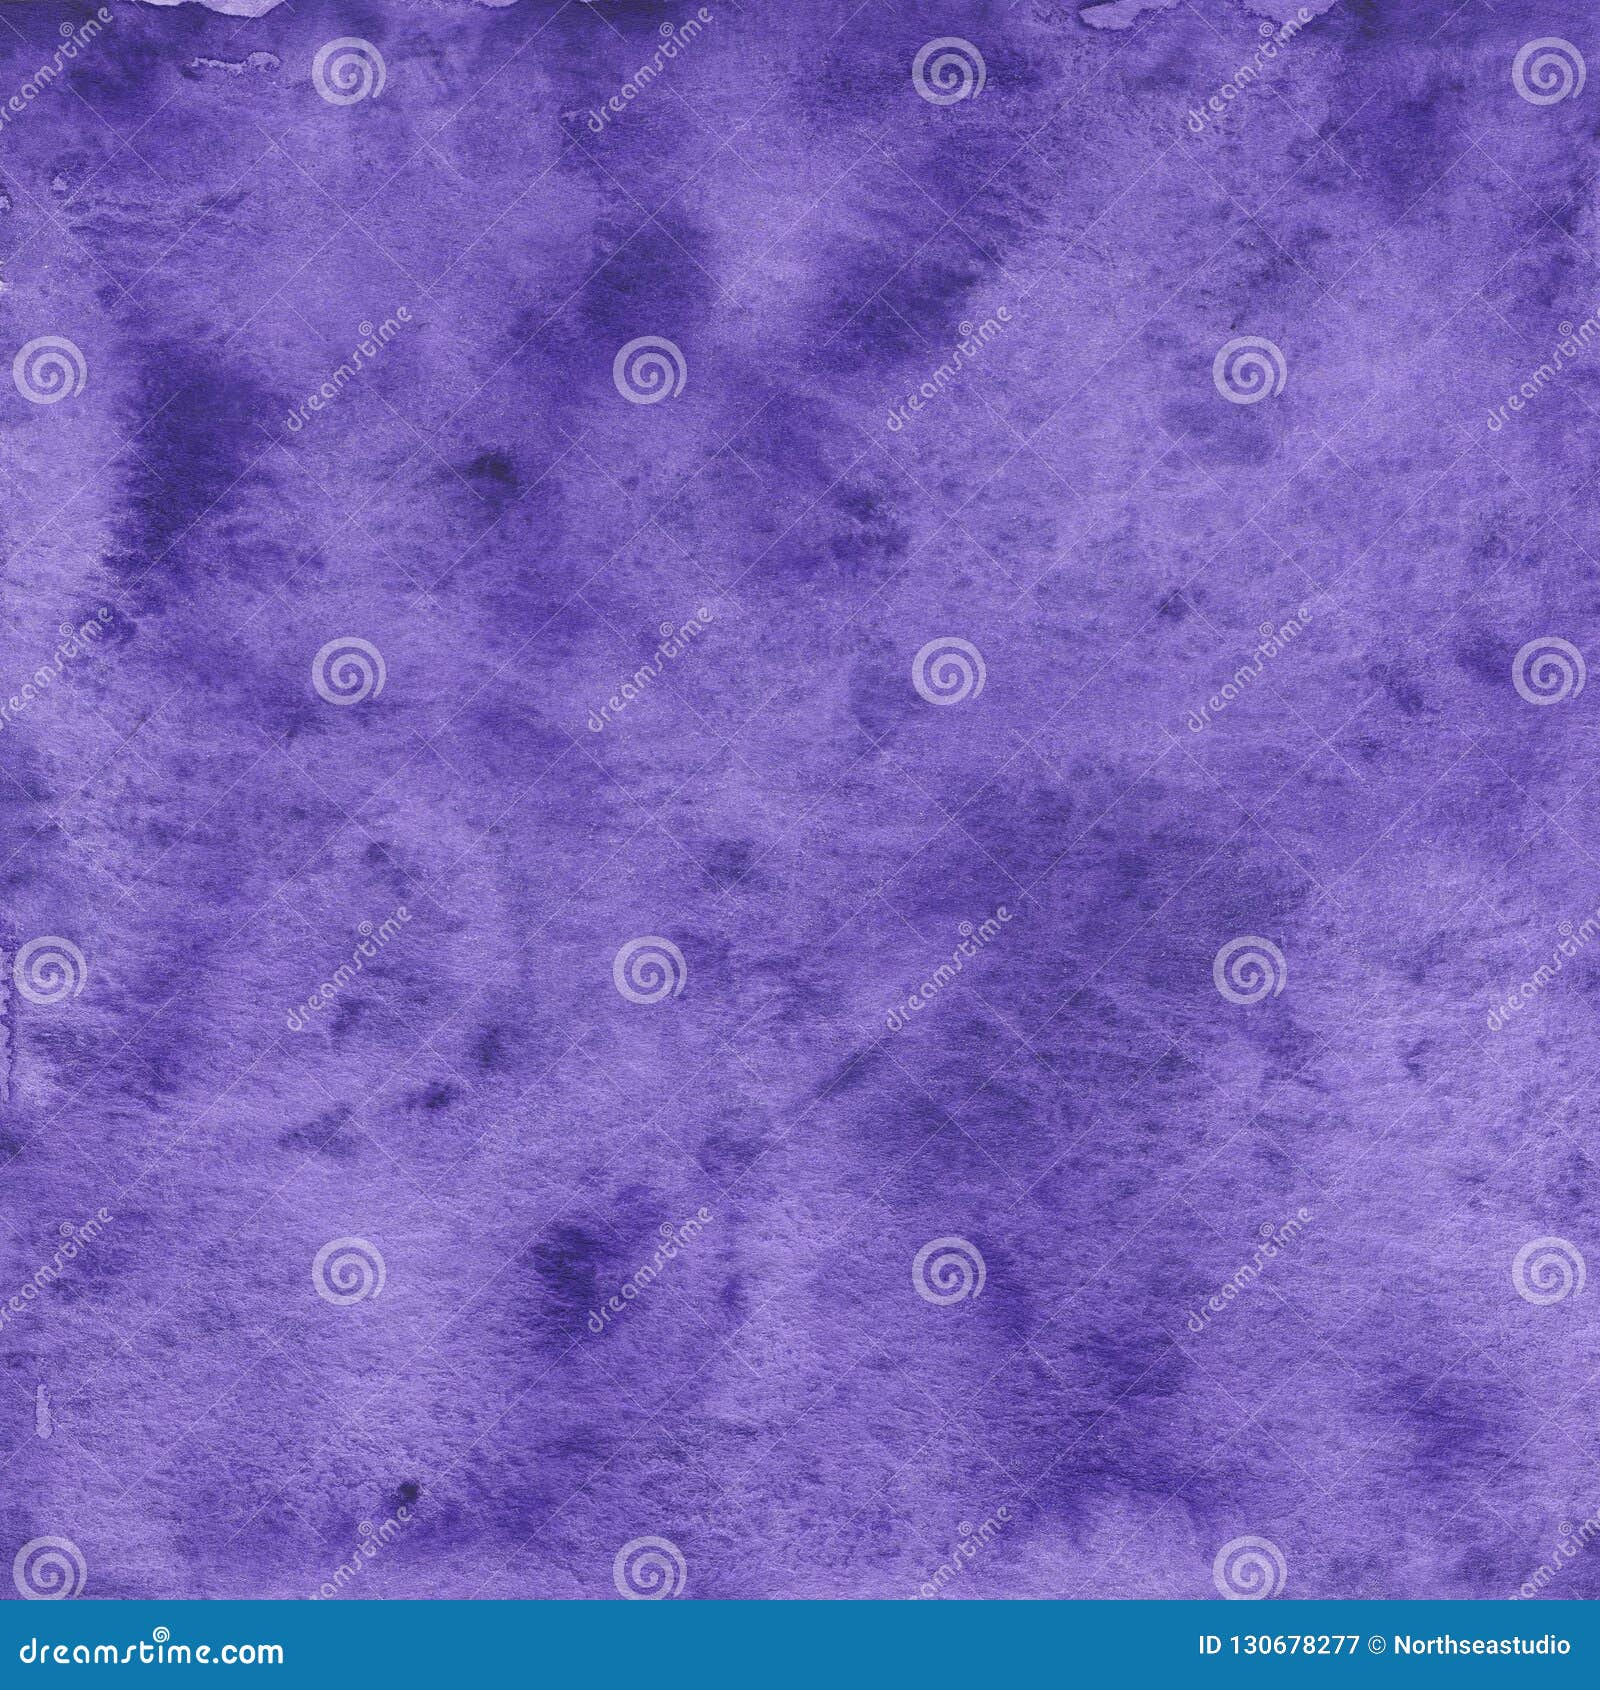 Purple watercolor texture stock image. Image of painted - 130678277